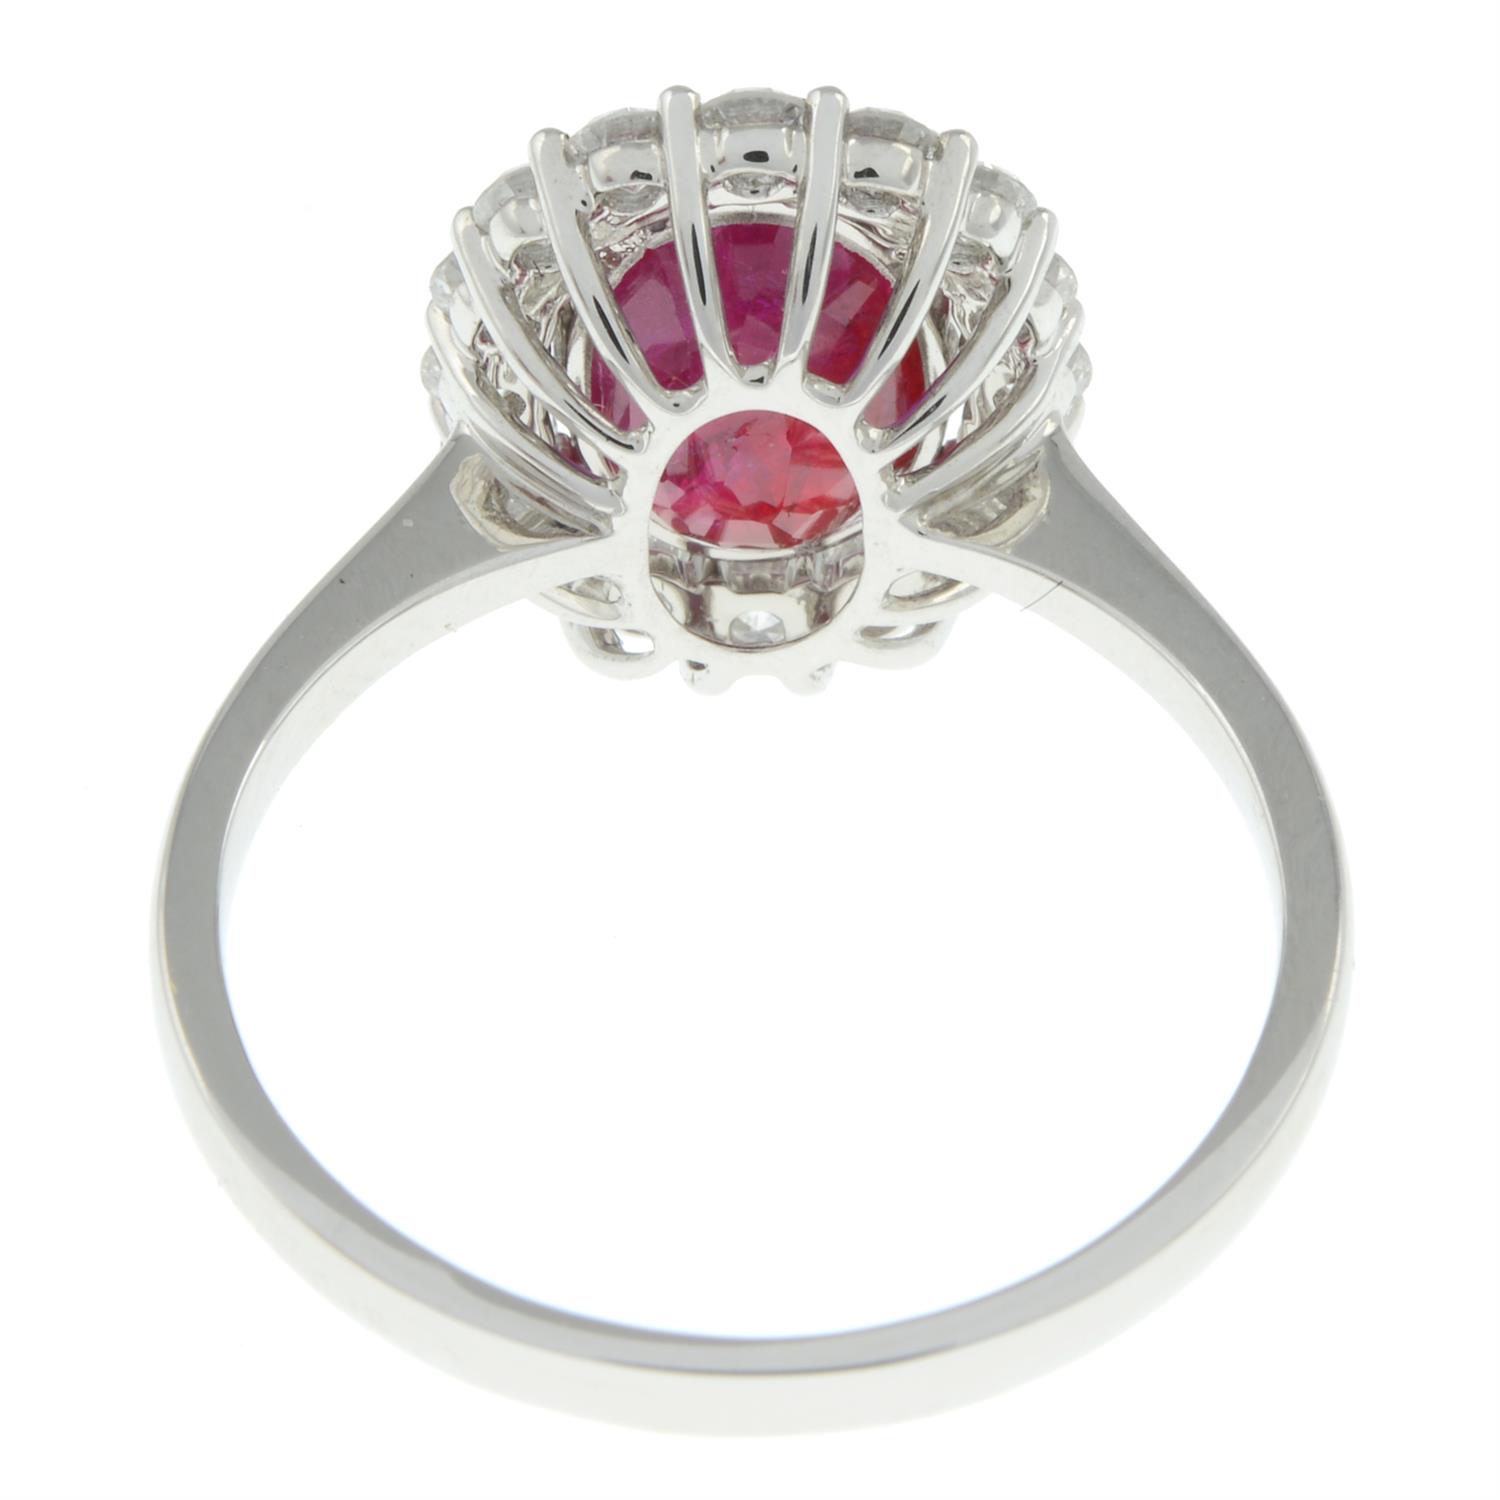 18ct gold Burmese ruby and diamond ring - Image 3 of 6